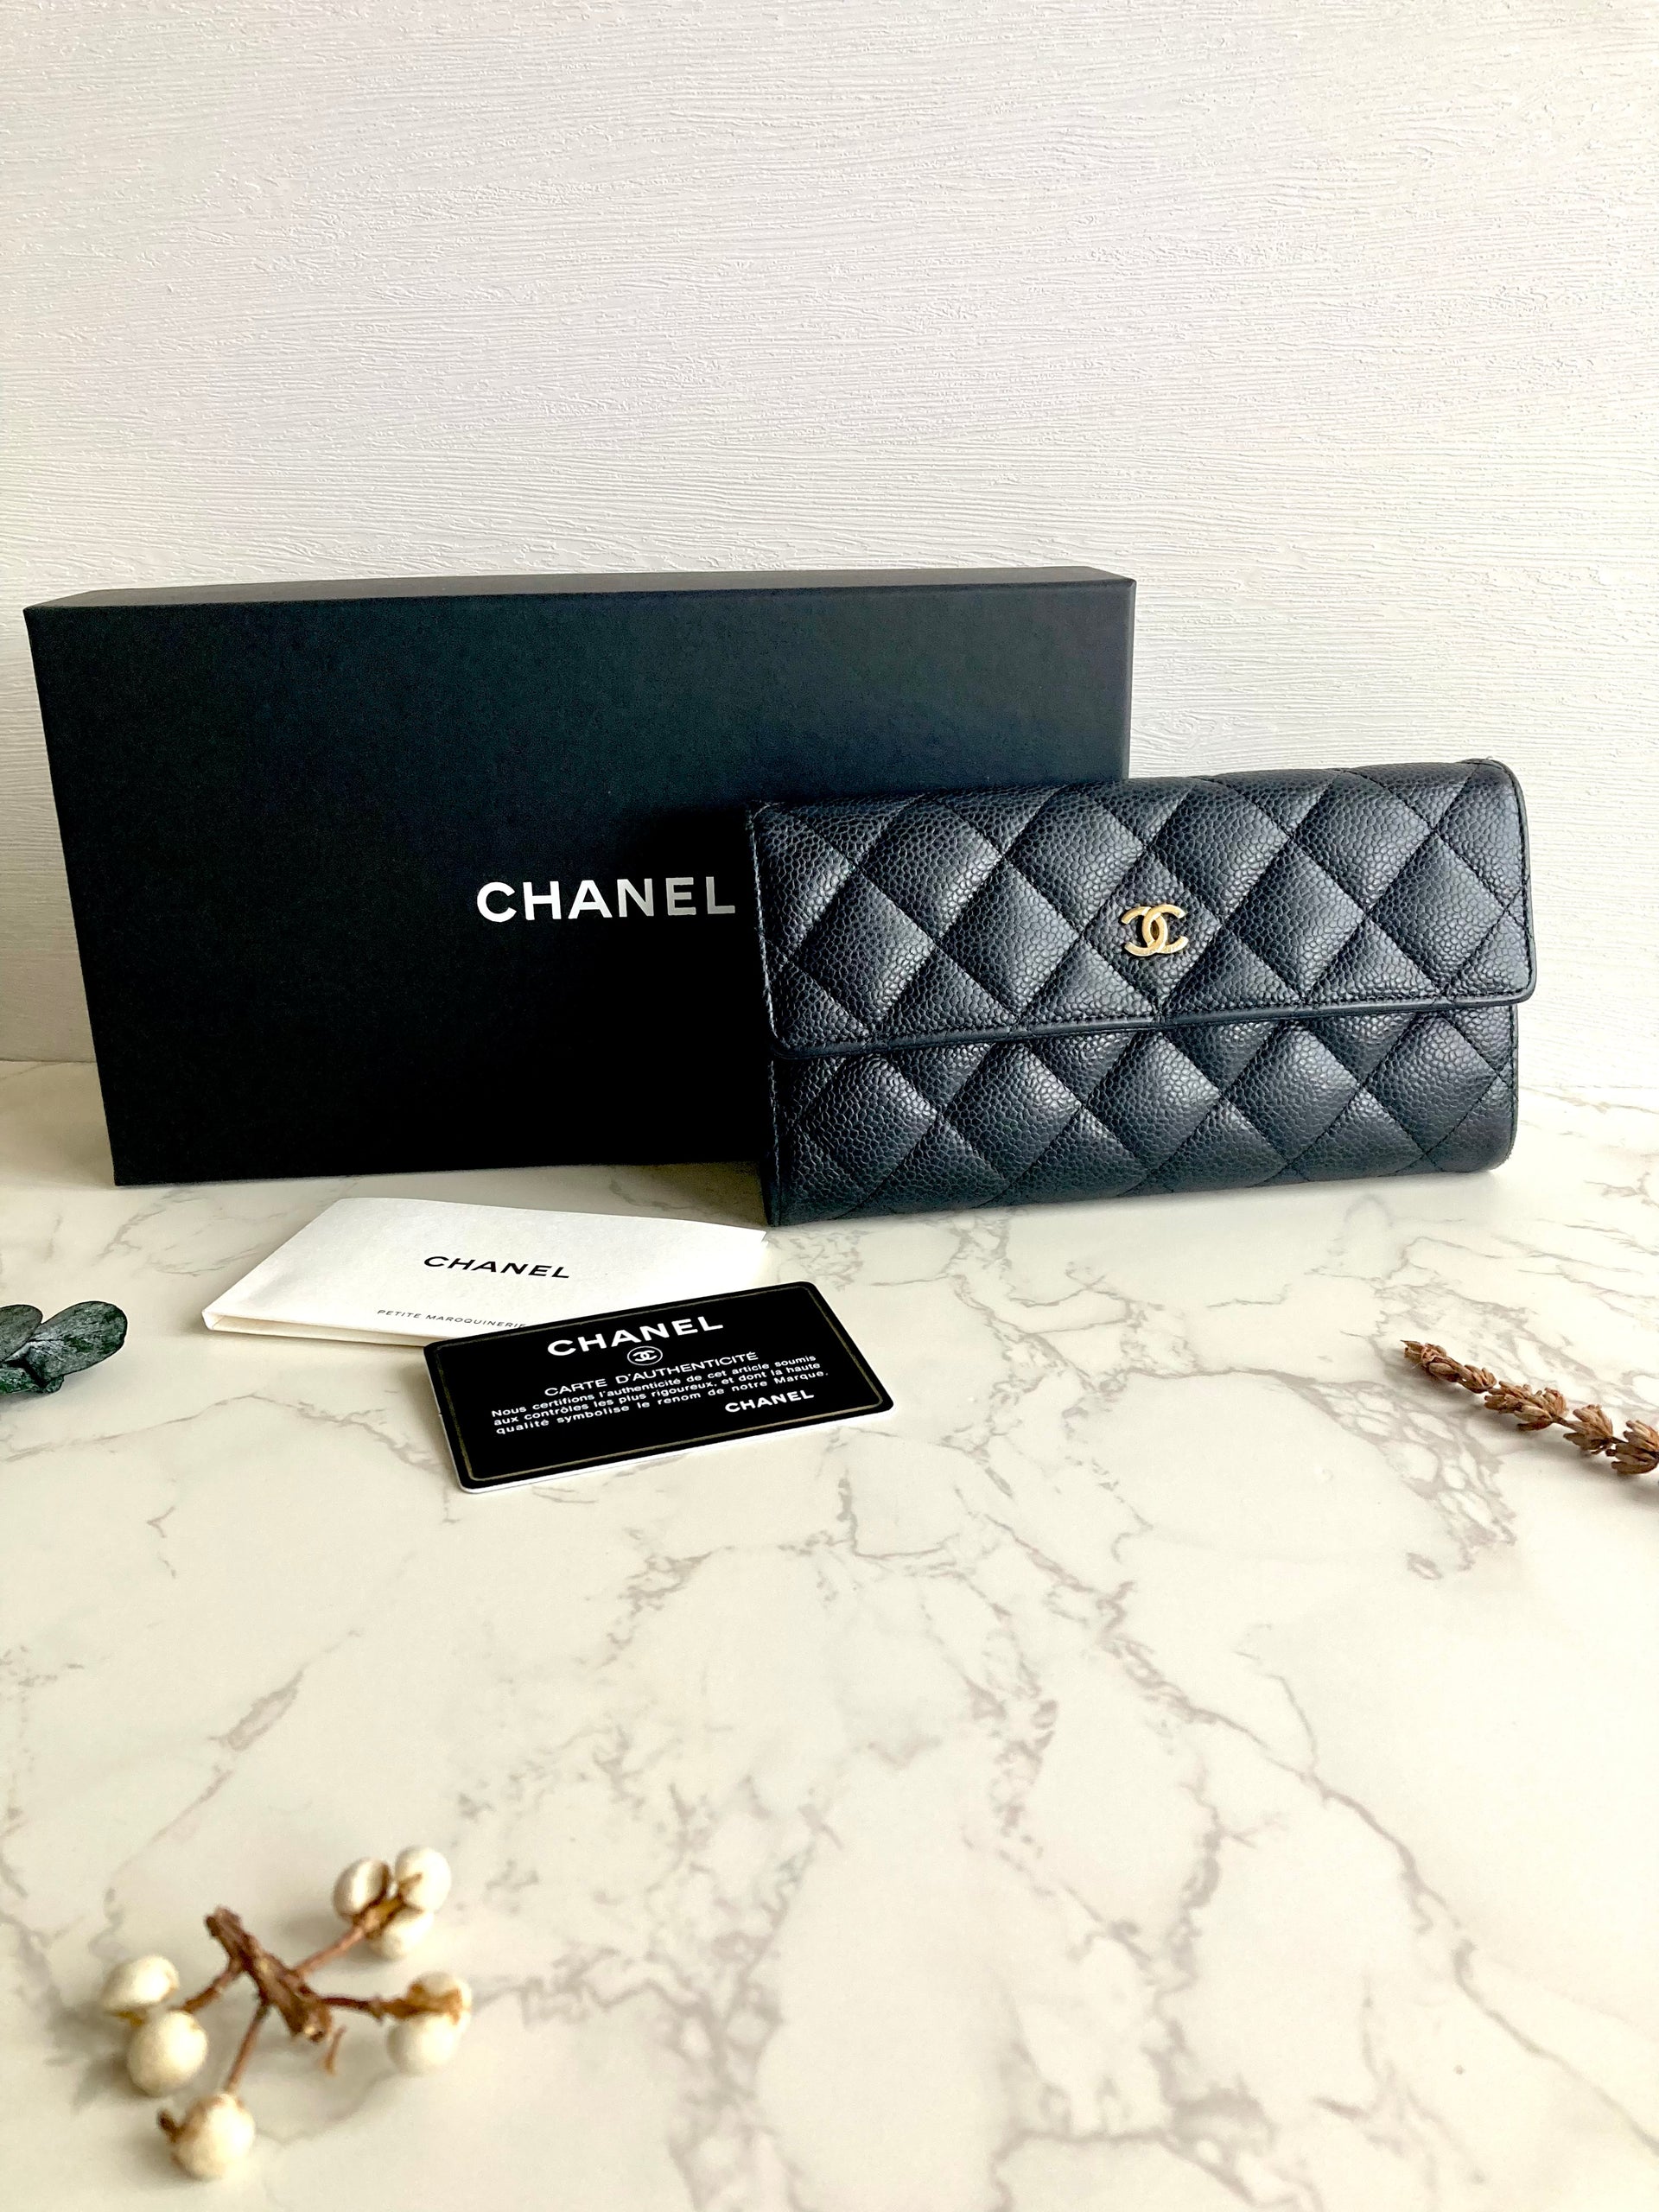 Chanel Gusset Flap Caviar Leather Wallet